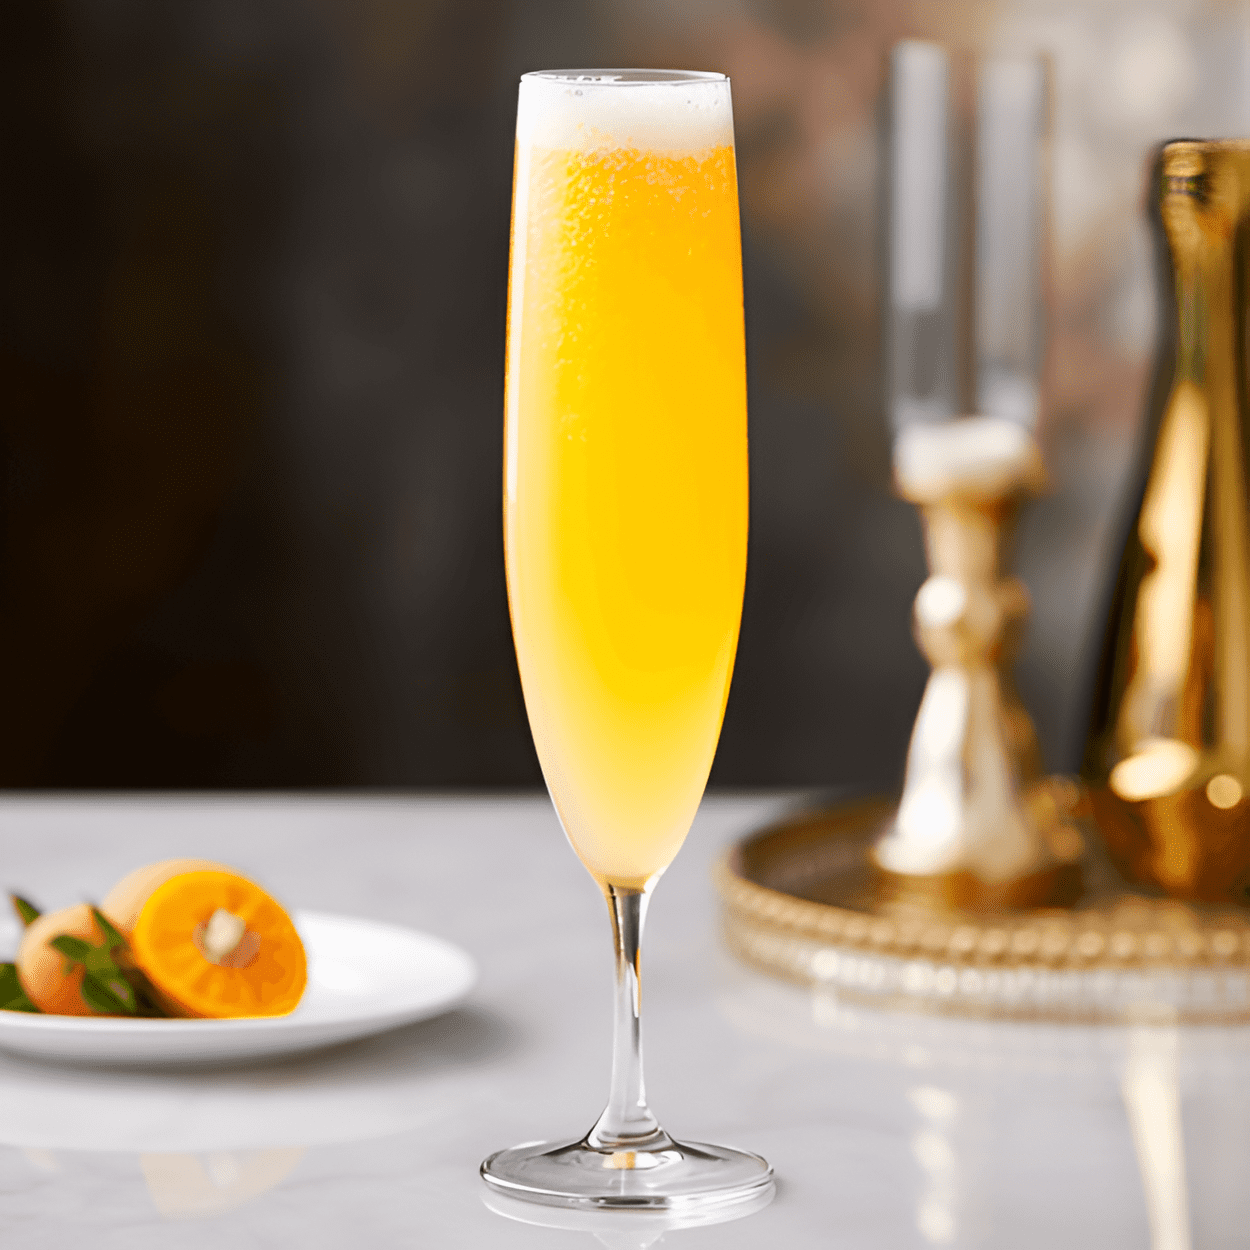 Mango Bellini Cocktail Recipe - The Mango Bellini has a sweet, fruity taste with a hint of tartness from the Prosecco. The ripe mango gives it a tropical, juicy flavor, while the Prosecco adds a light, bubbly texture. It's a refreshing, well-balanced cocktail that's not too strong or too sweet.